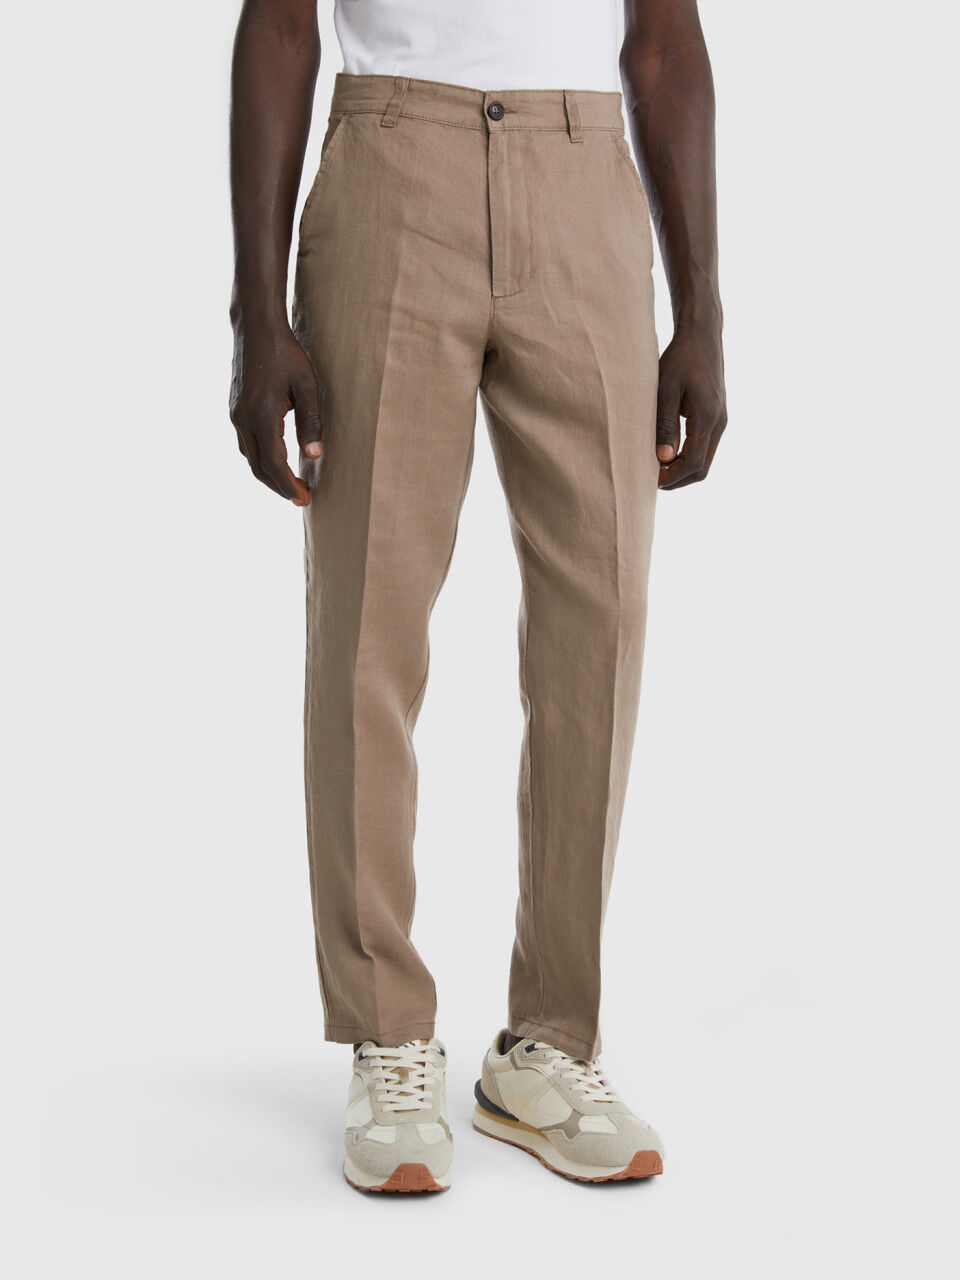 Buy United Colors of Benetton Solid Slim Fit Trousers online